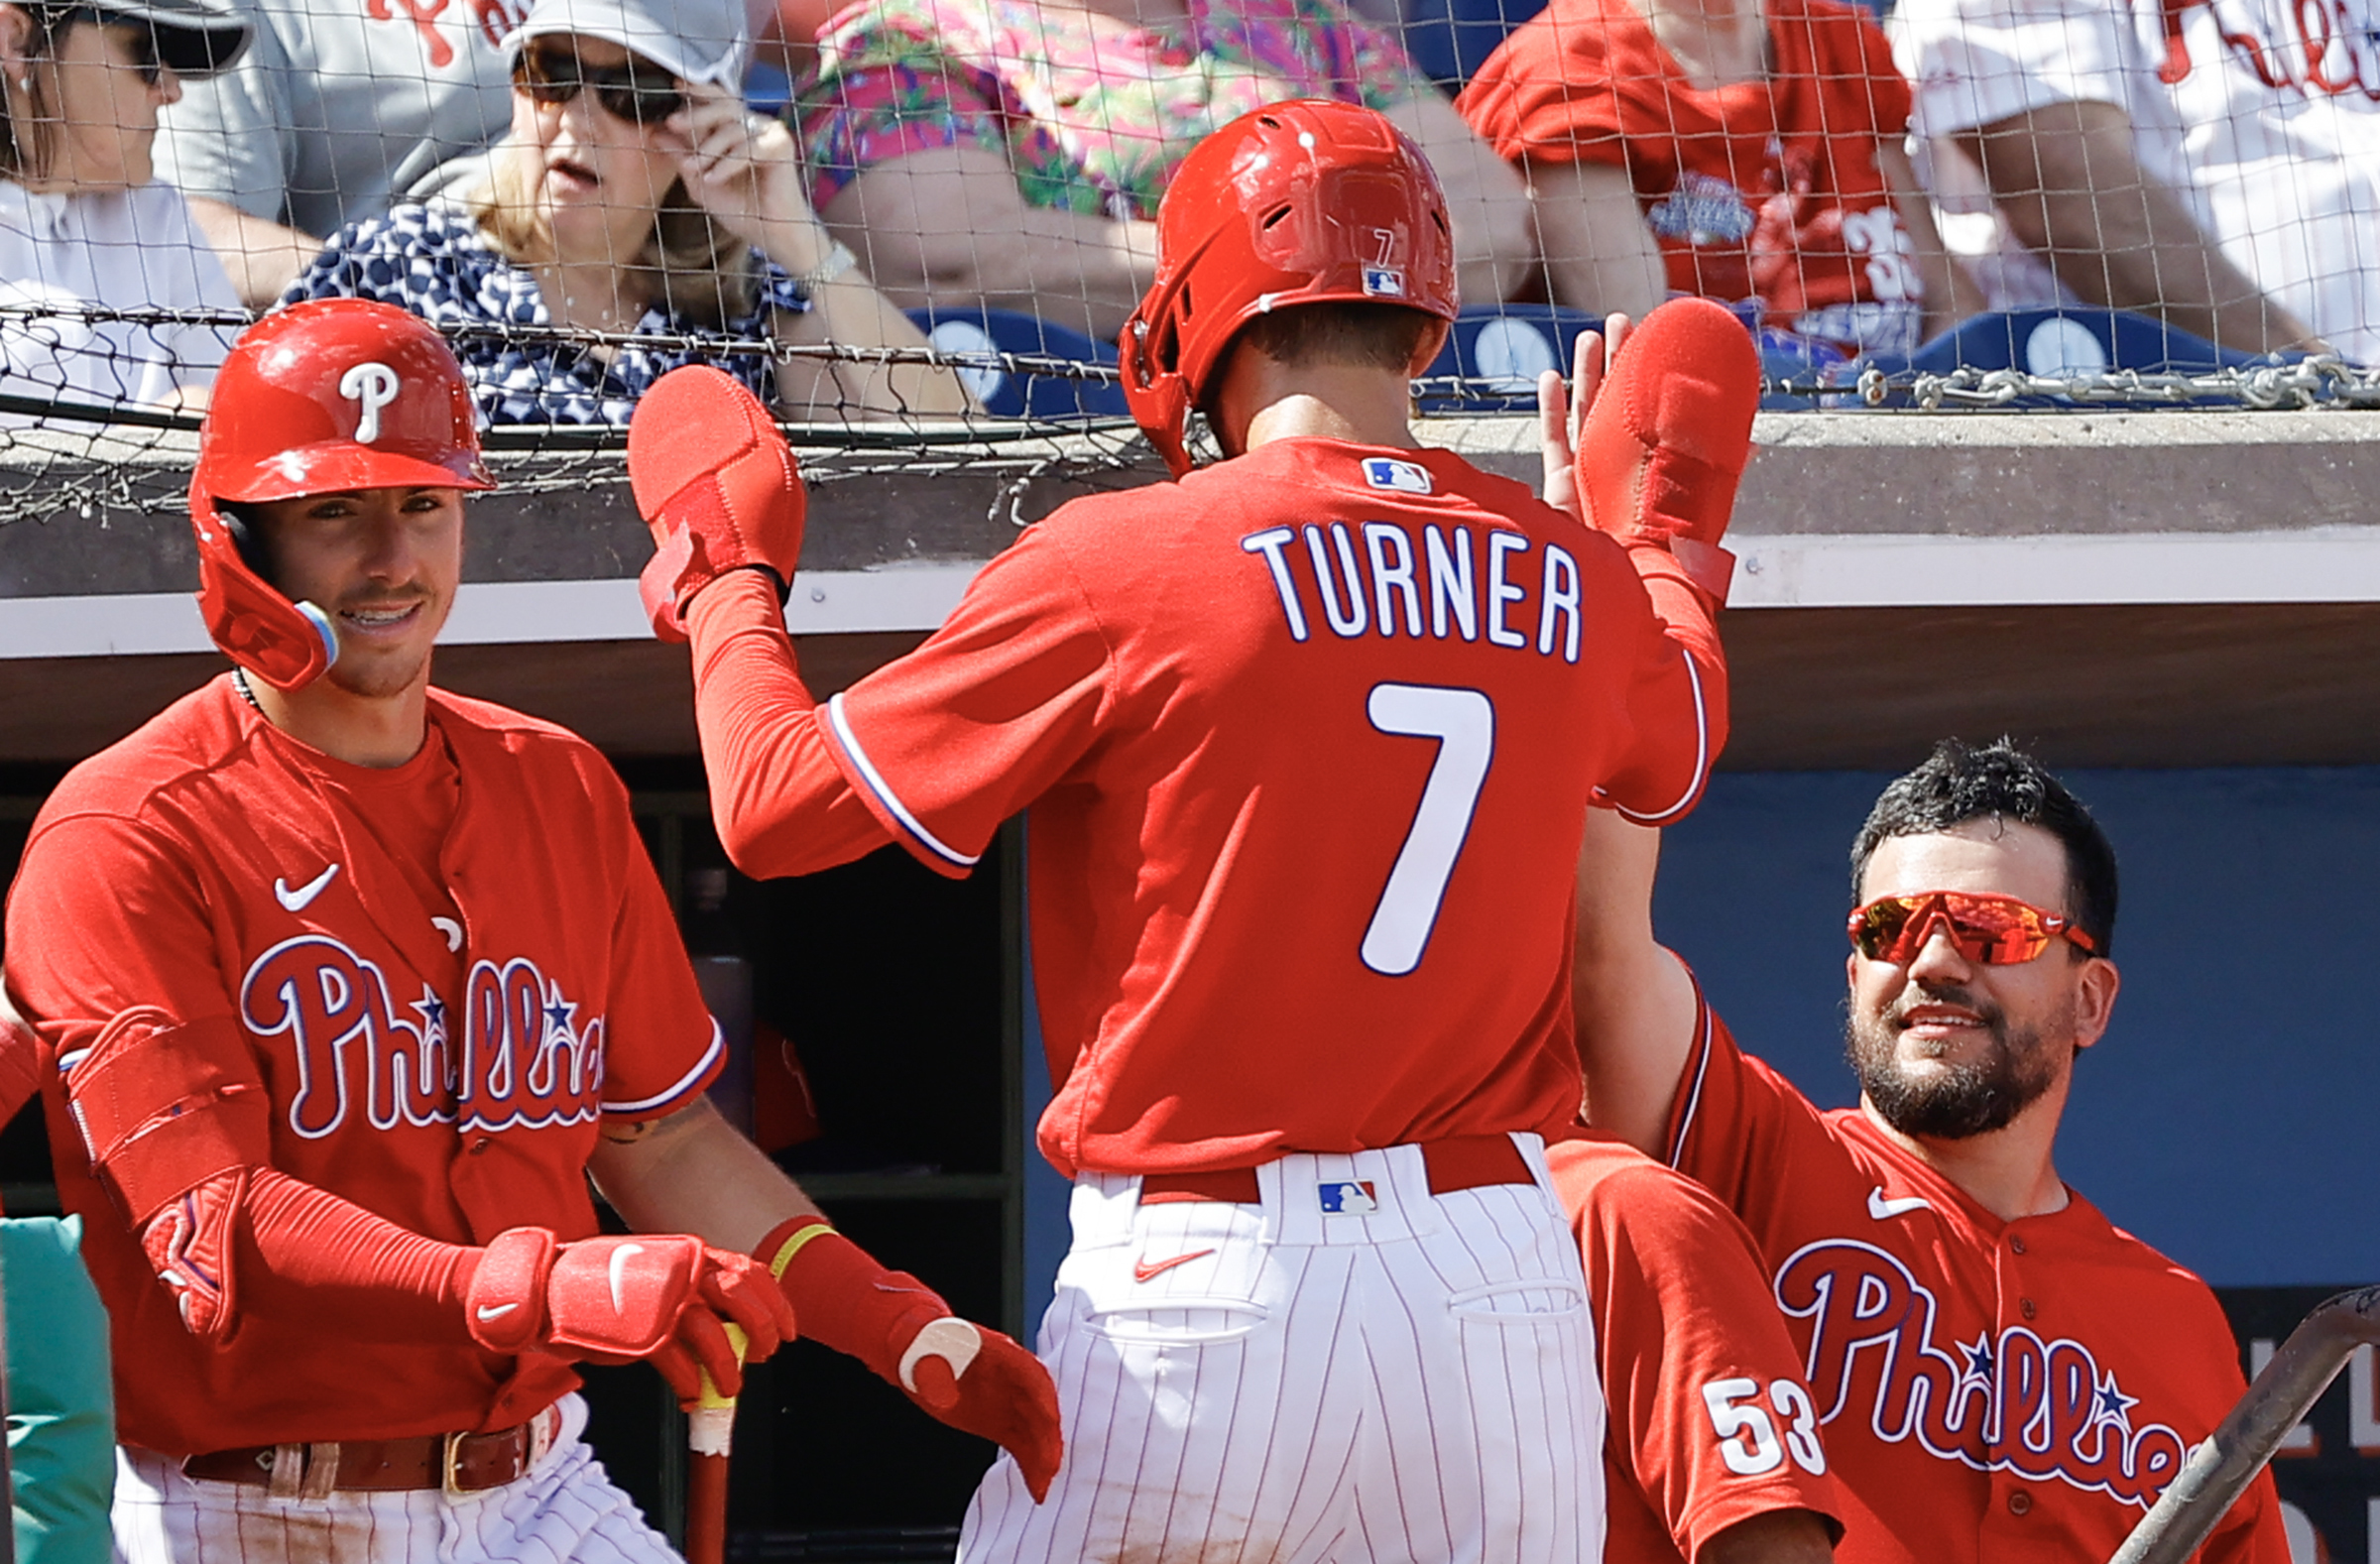 Trea Turner put his mind to improving after rough start with